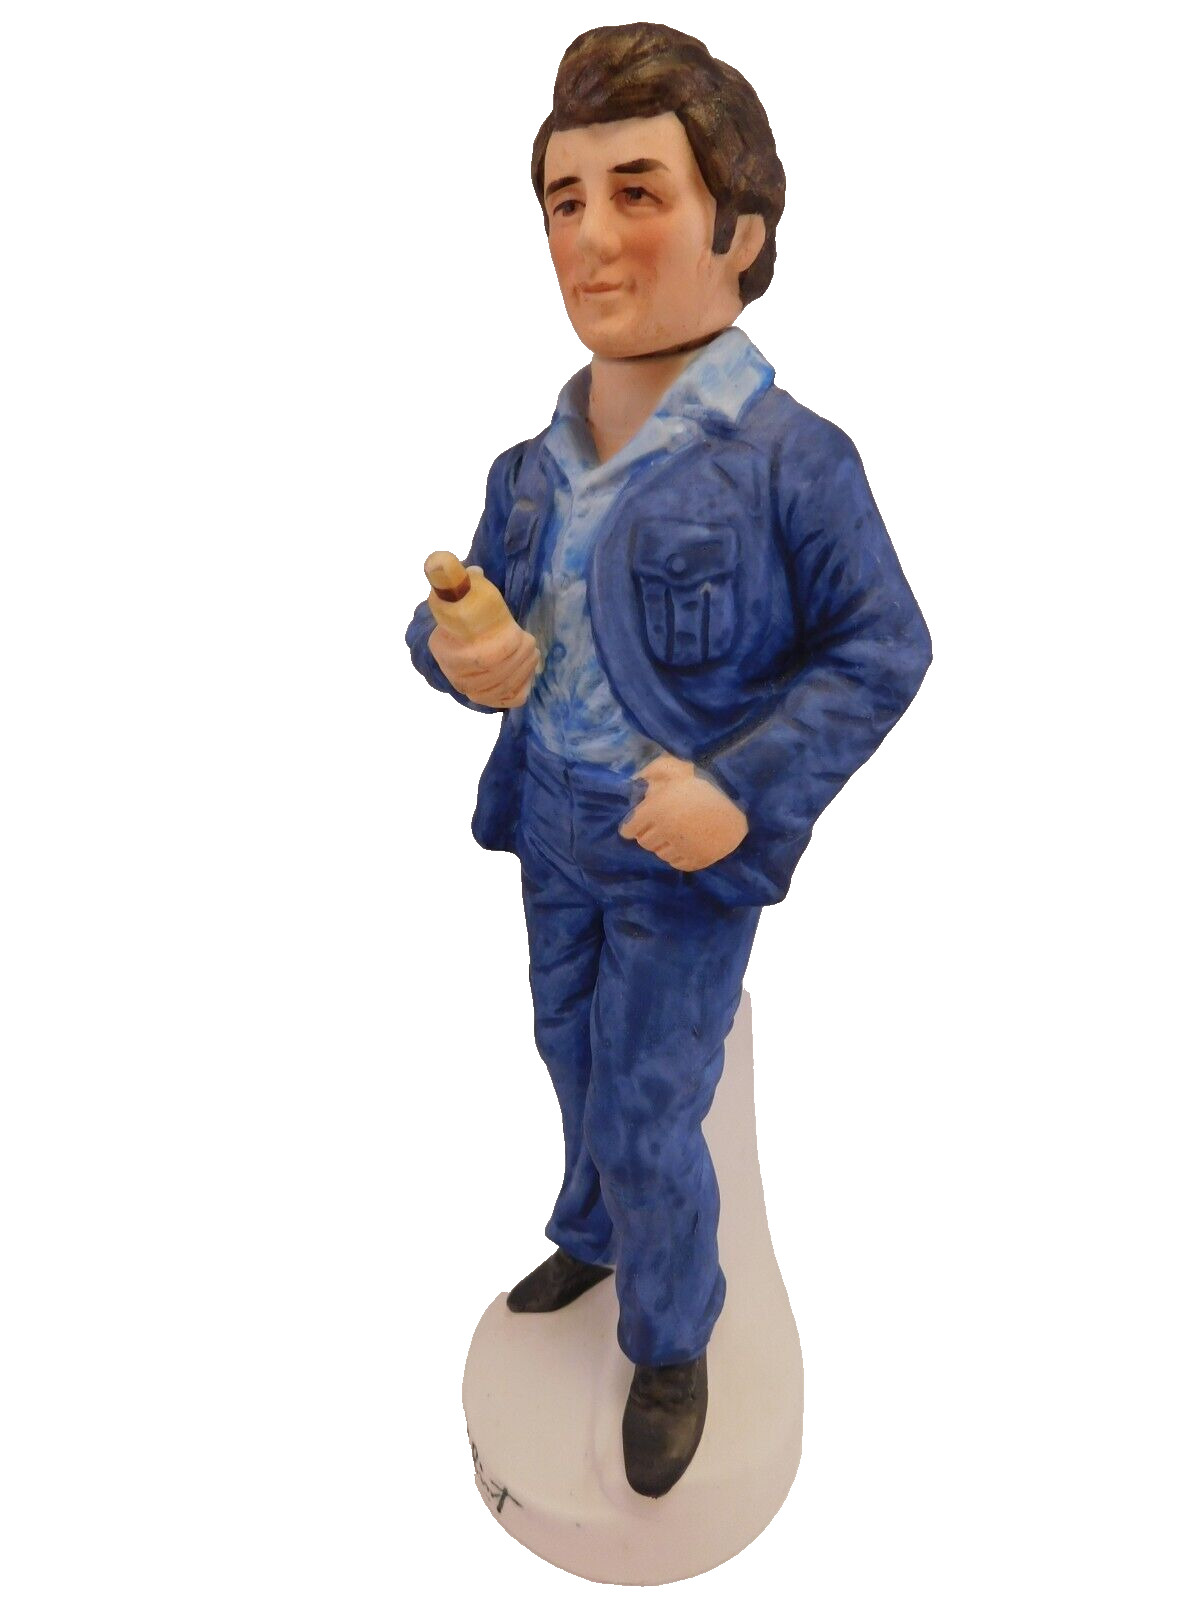 Vintage Clint Eastwood Decanter Figure Gold Coast Collect Club Japanese Pottery